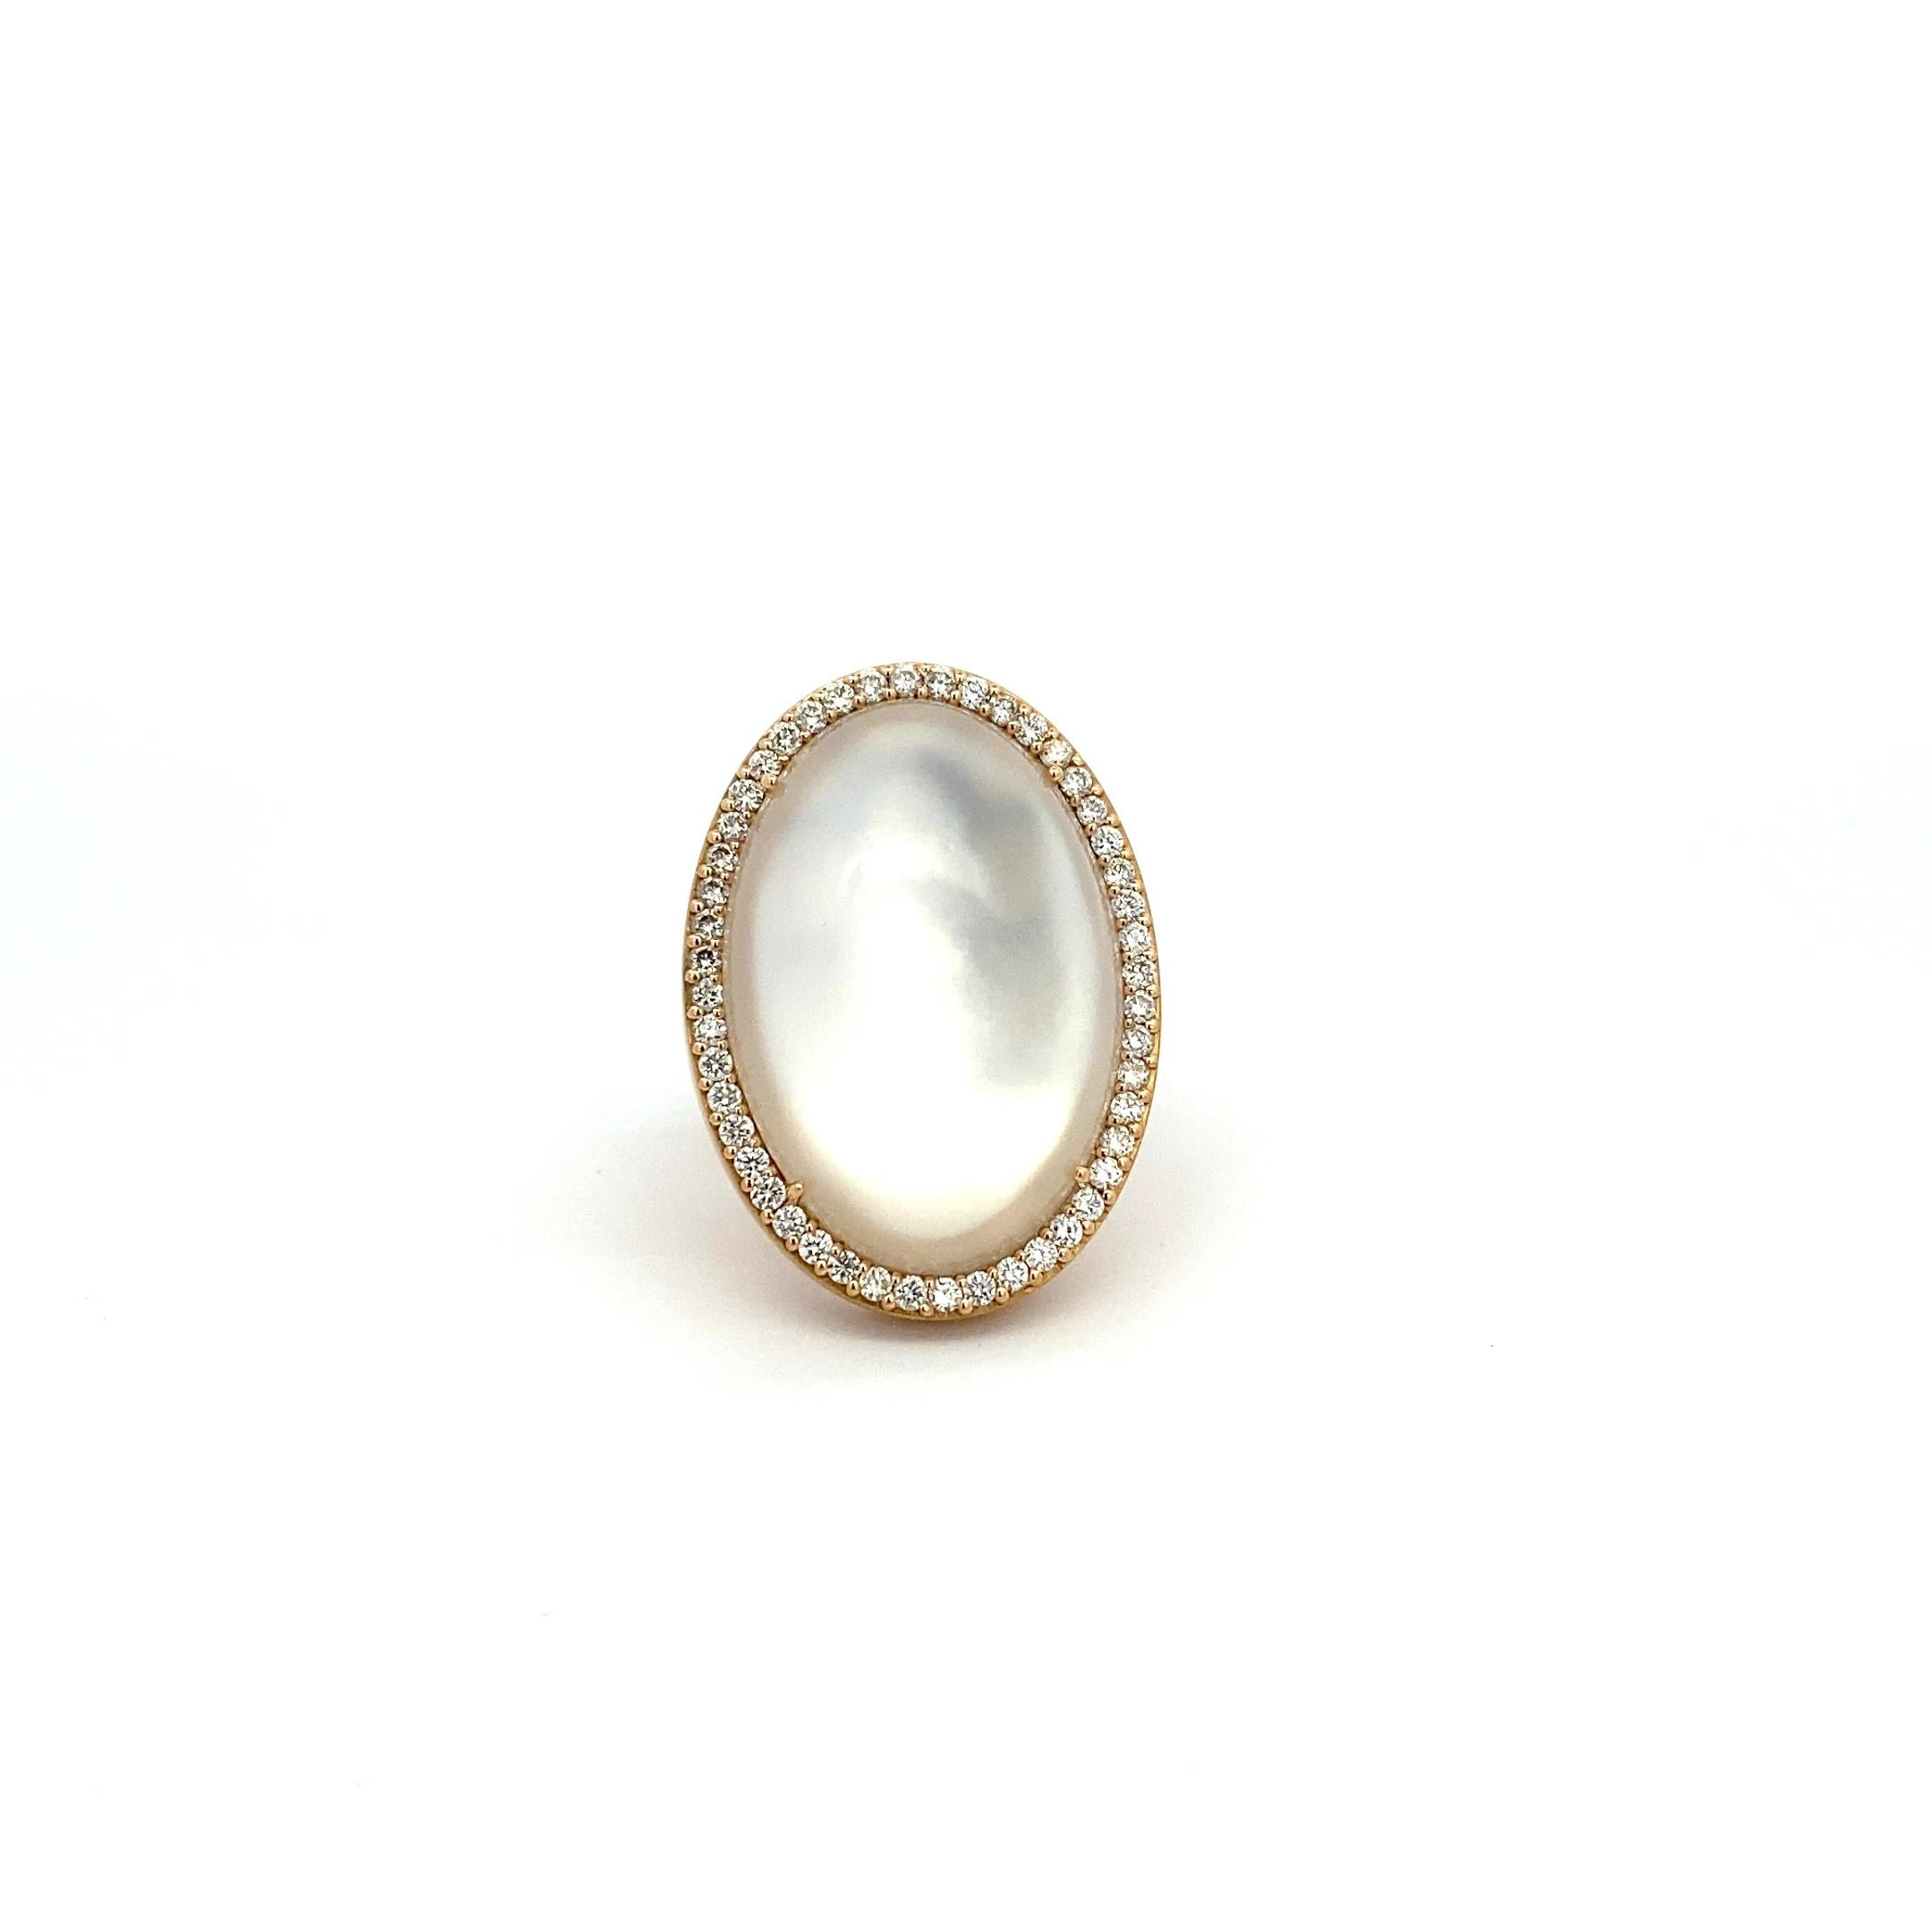 Introducing the exquisite Roberto Coin Diamond, Quartz and Mother of Pearl Ring, a truly captivating piece that combines elegance and sophistication. Crafted in luxurious 18 karat rose gold, this stunning ring features a luminous 19.5 x 28 mm